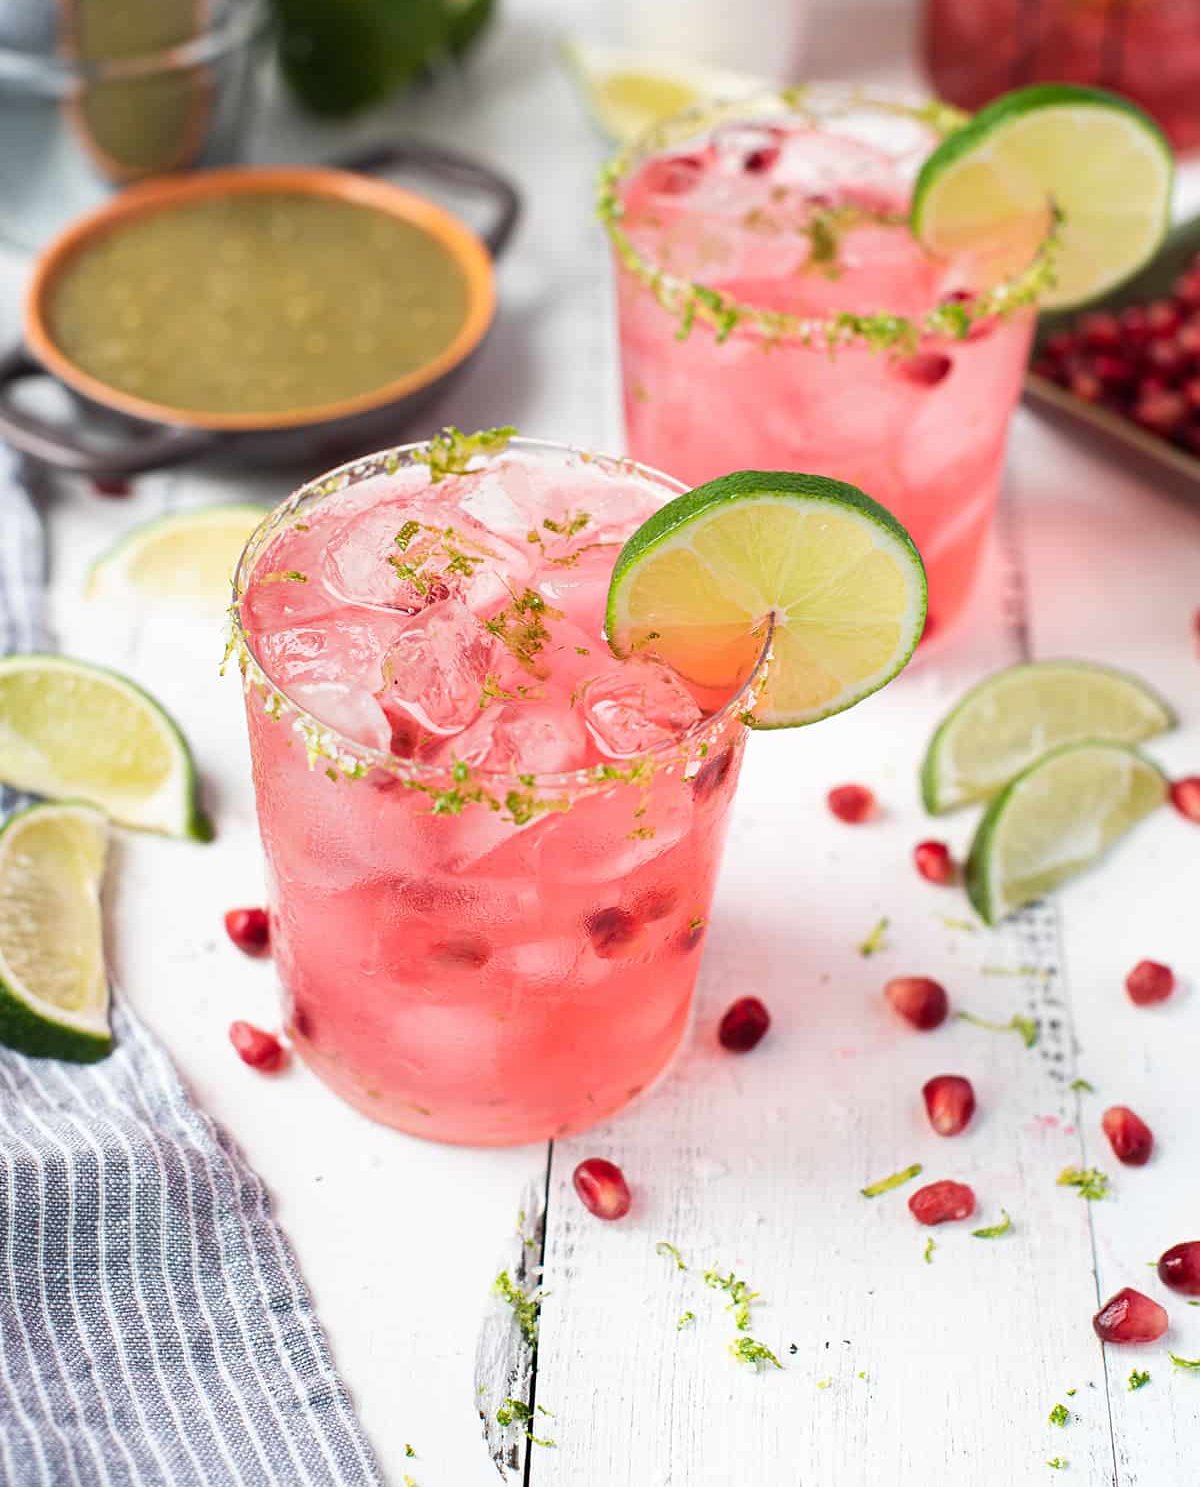 Glasses with a pink cocktail and lime garnish surrounded by pomegranate seeds.